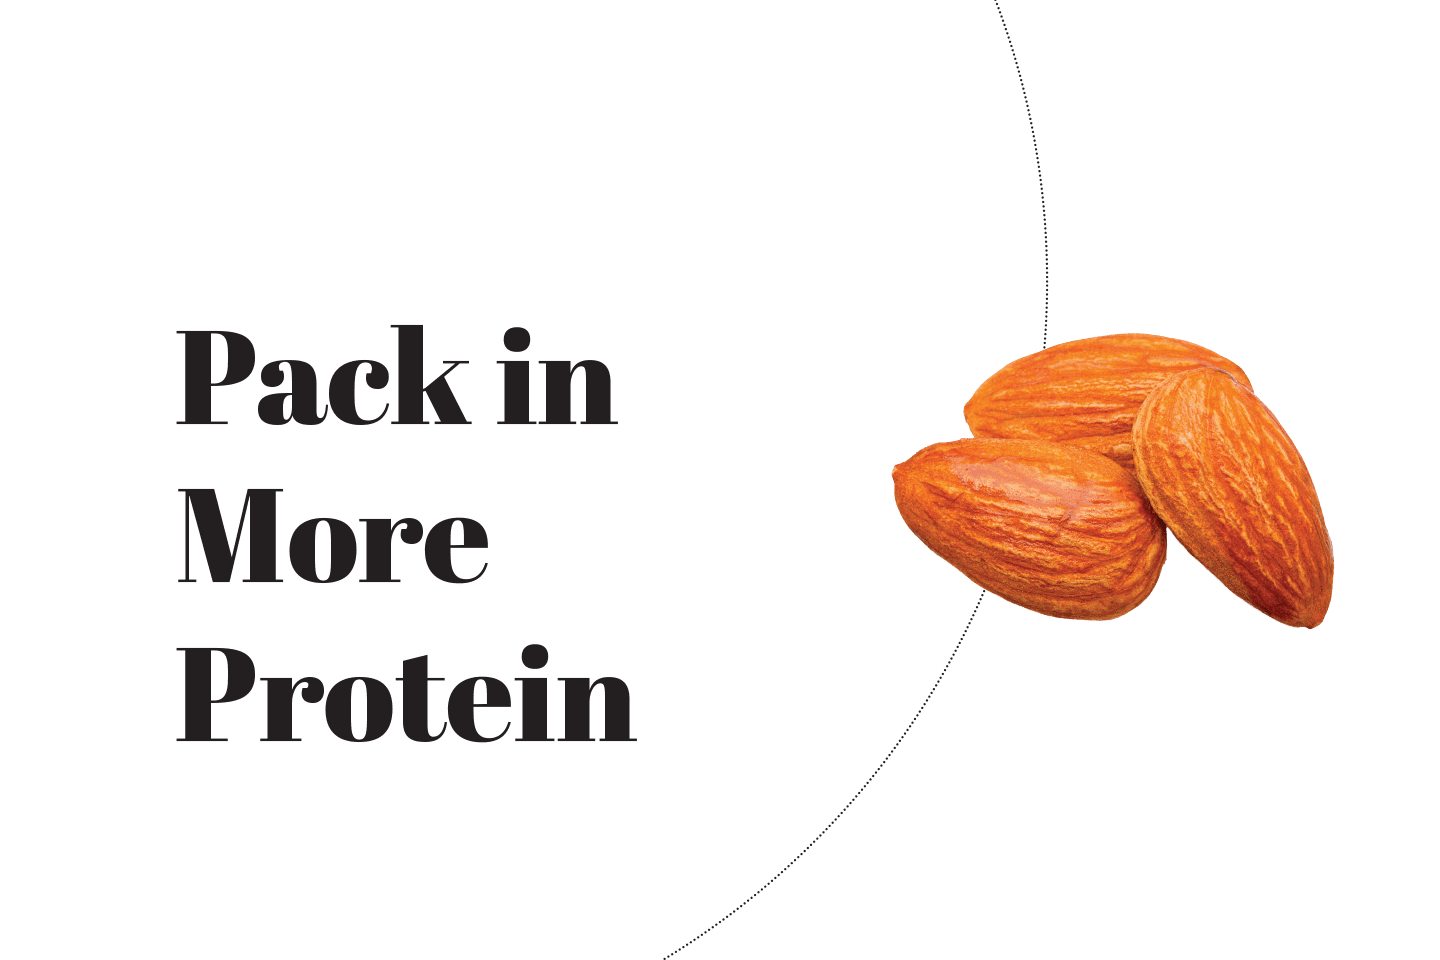 Pack in more protein almonds chattanooga